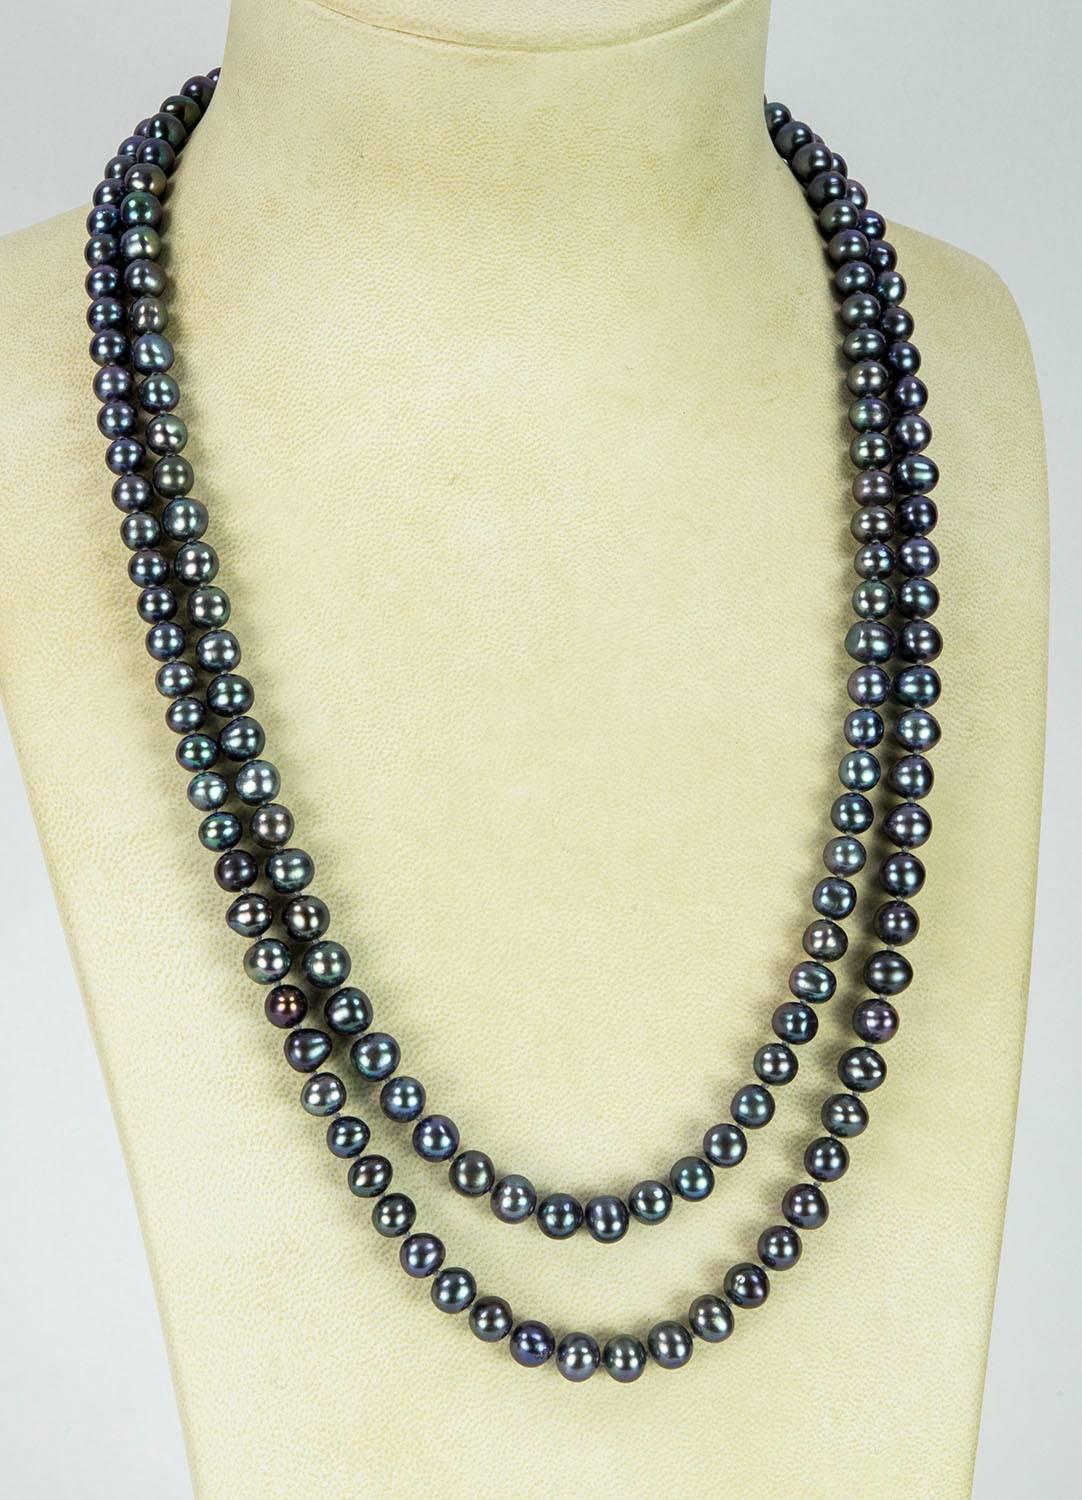 Striking lustrous 7.5-8mm Silver/Grey Freshwater Pearl Necklace, hand knotted with matching color silk thread, Necklace measures approx. 54” long. Go anywhere in style with this Chic and Timeless taking you from Day to Evening!